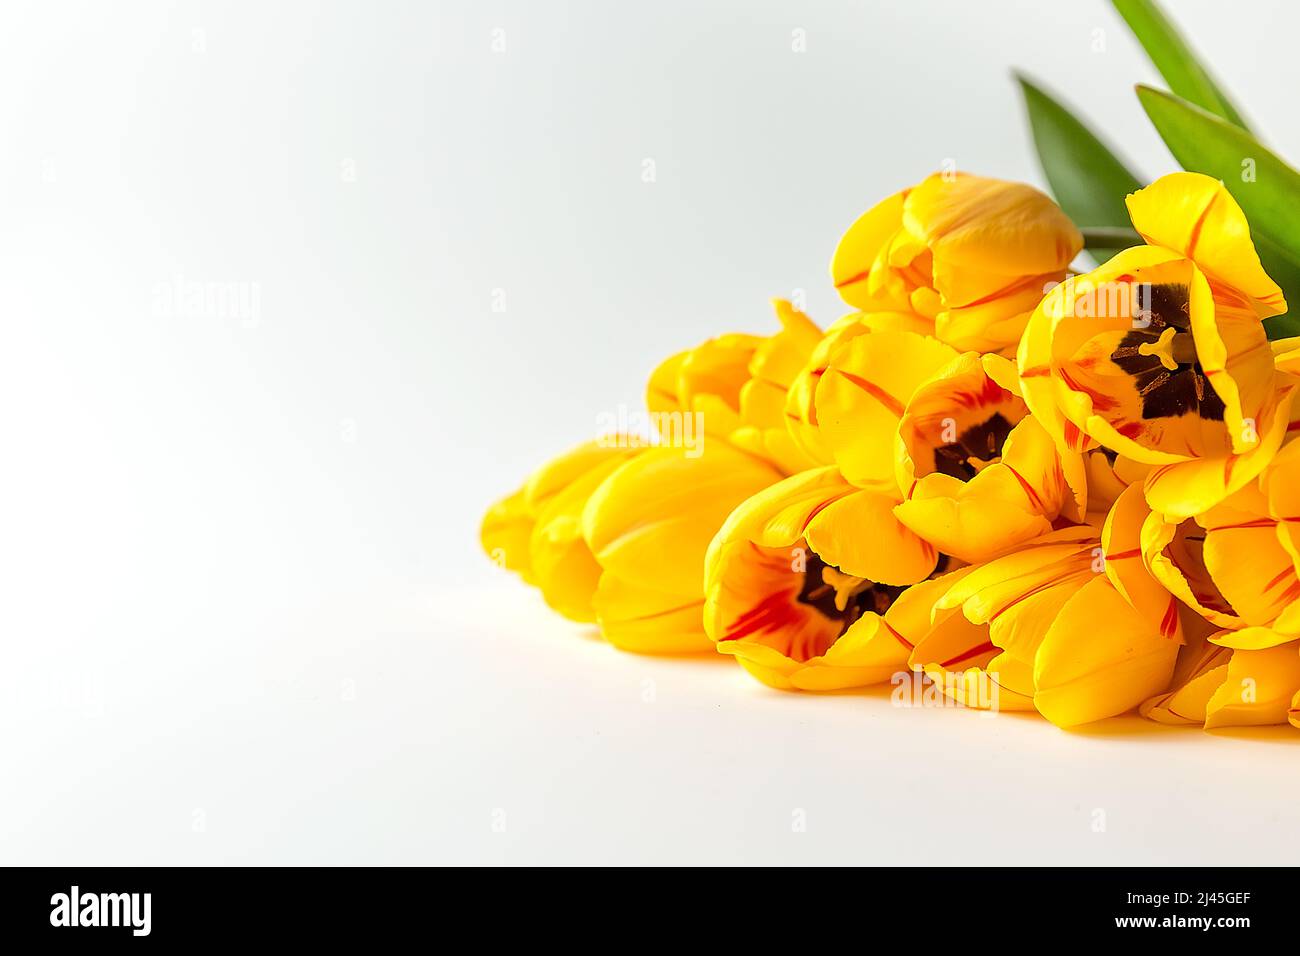 A large bouquet of yellow tulips lies on a white background. A ready-made place for your invitation text, congratulations. Stock Photo